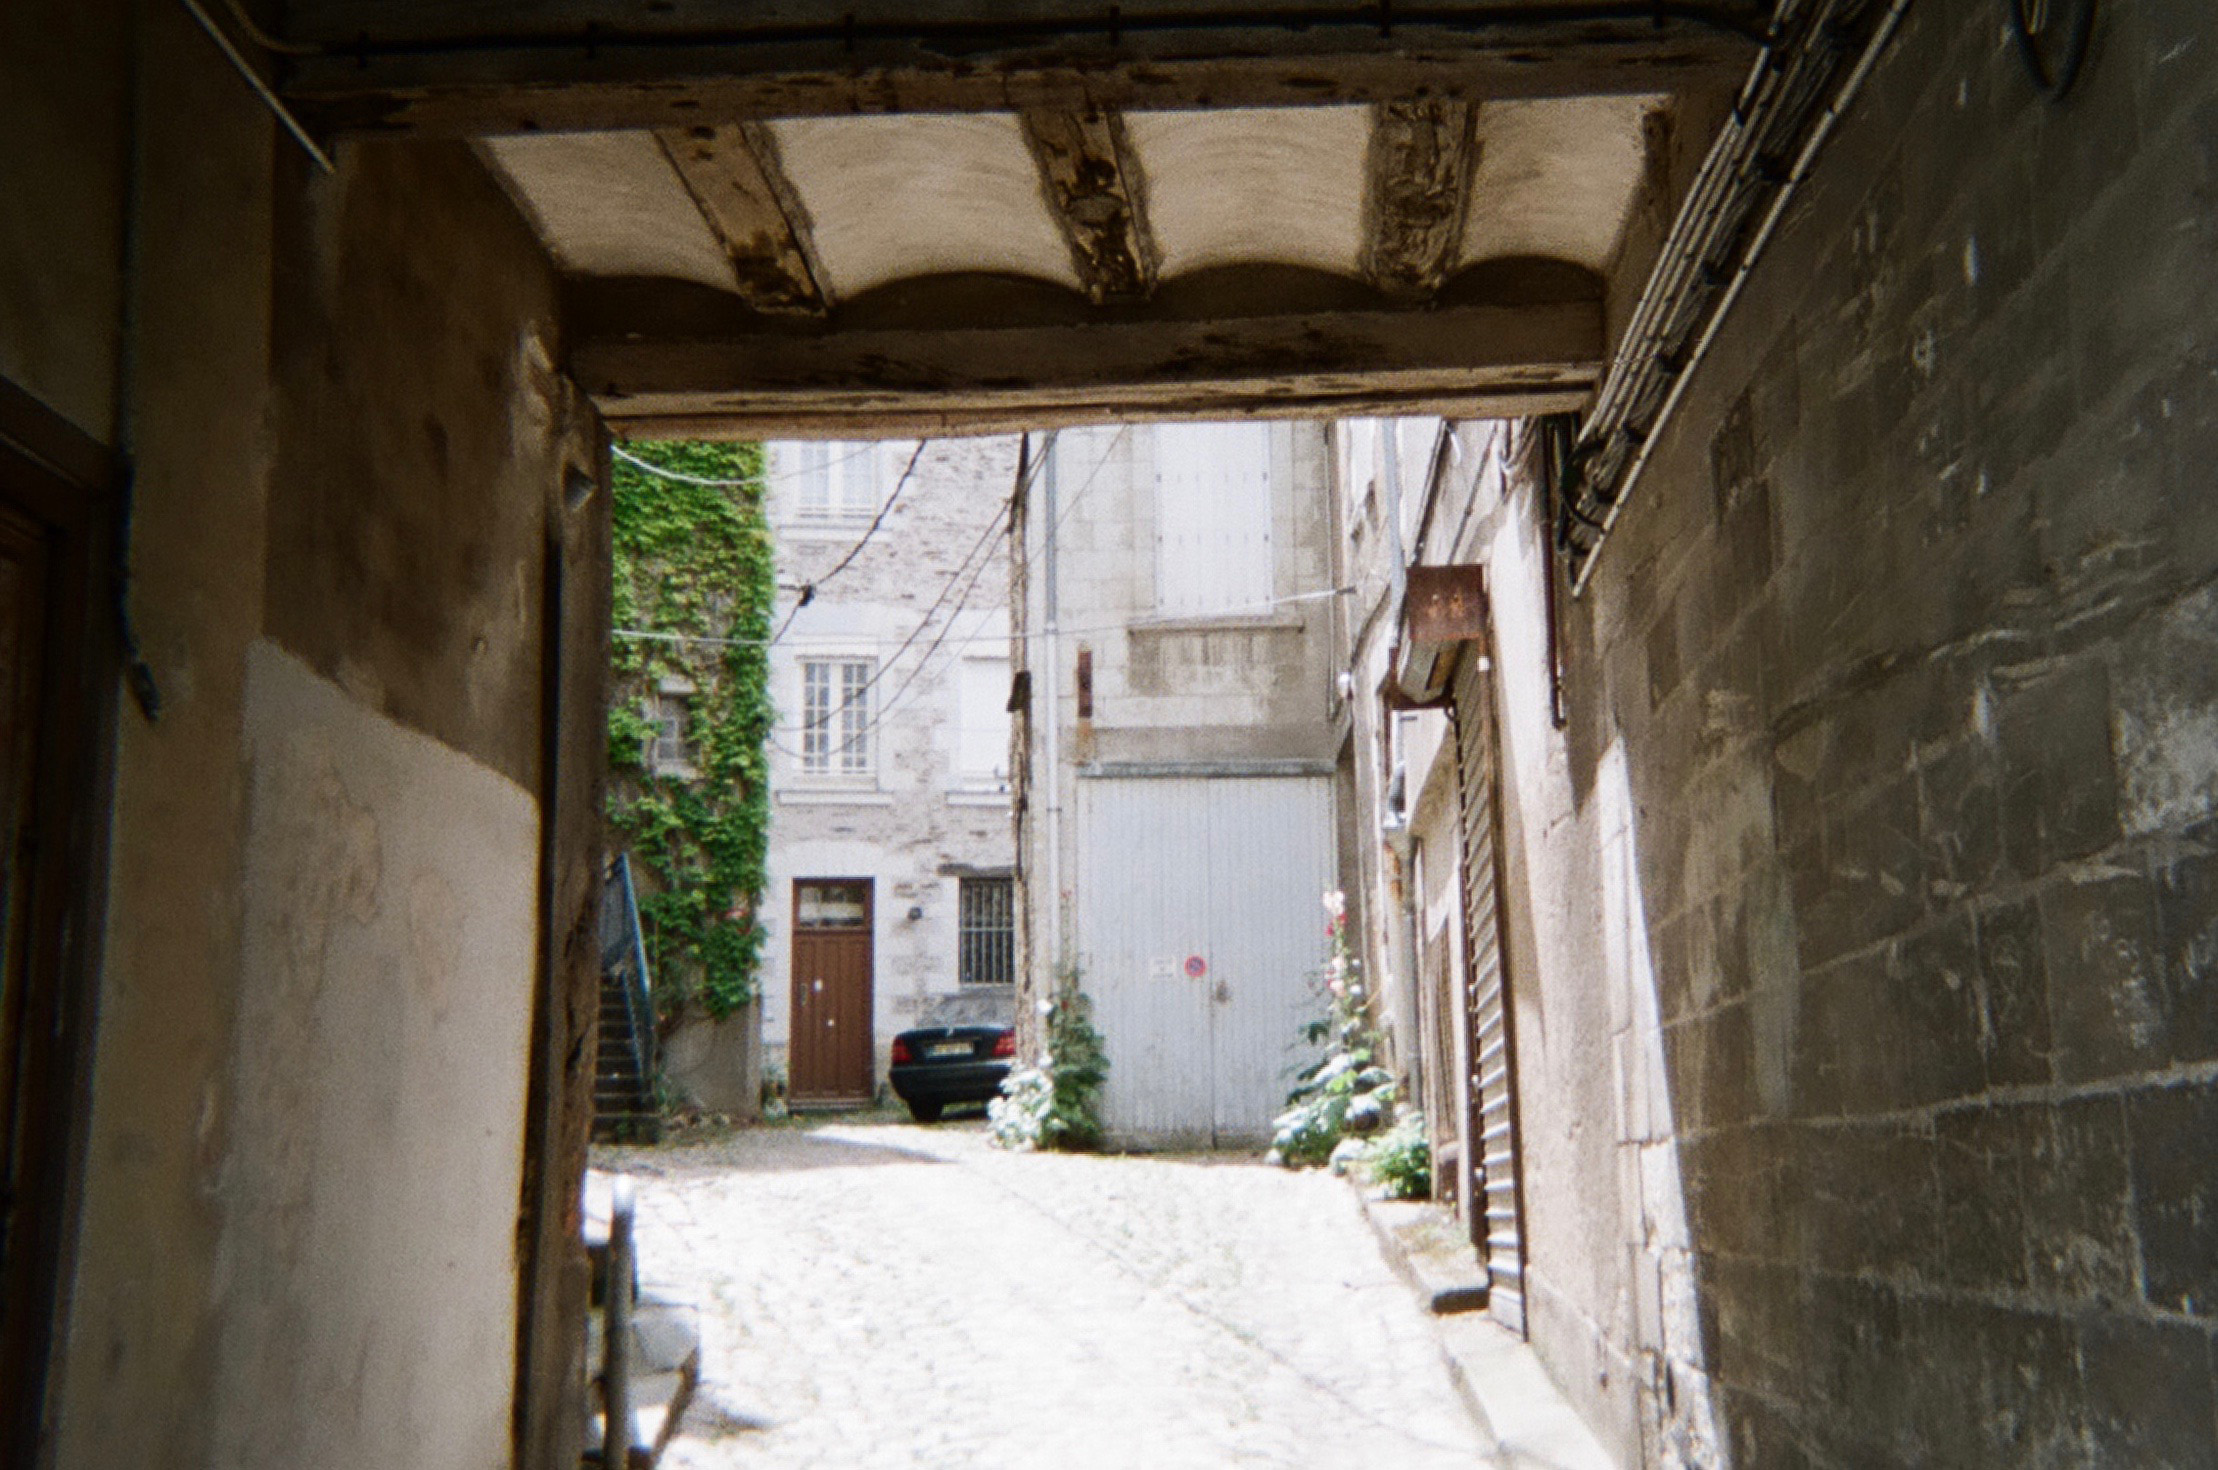 Angers, France on film